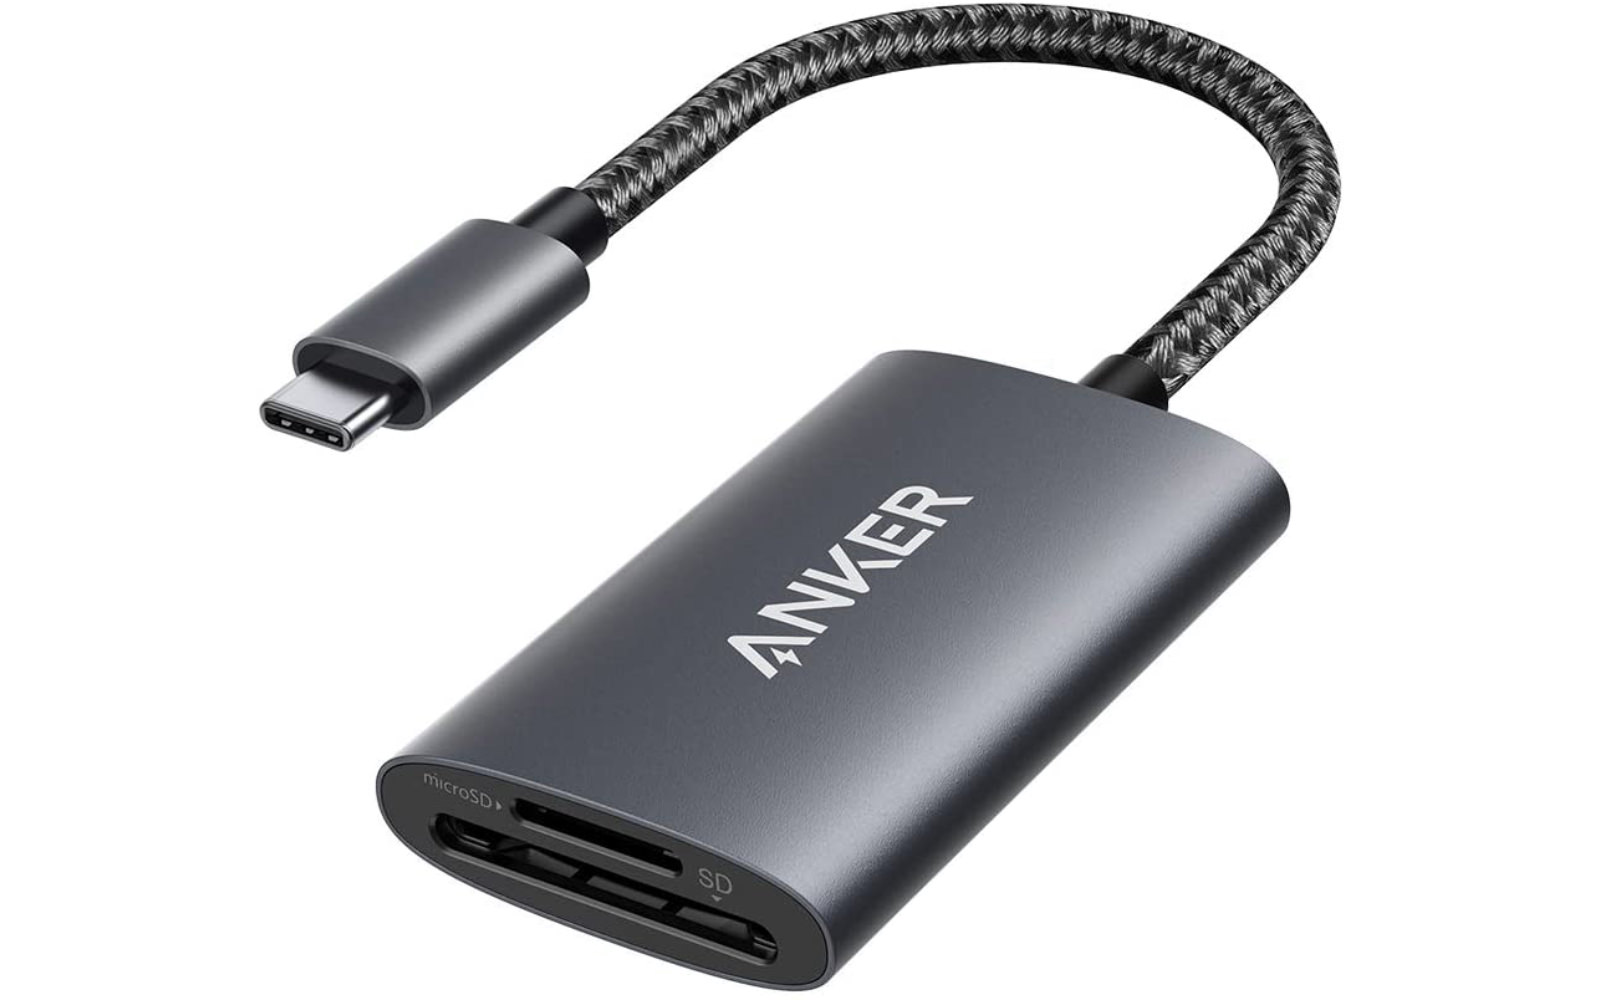 Anker USB C PowerExpand 2 in 1 SD4 adaptor